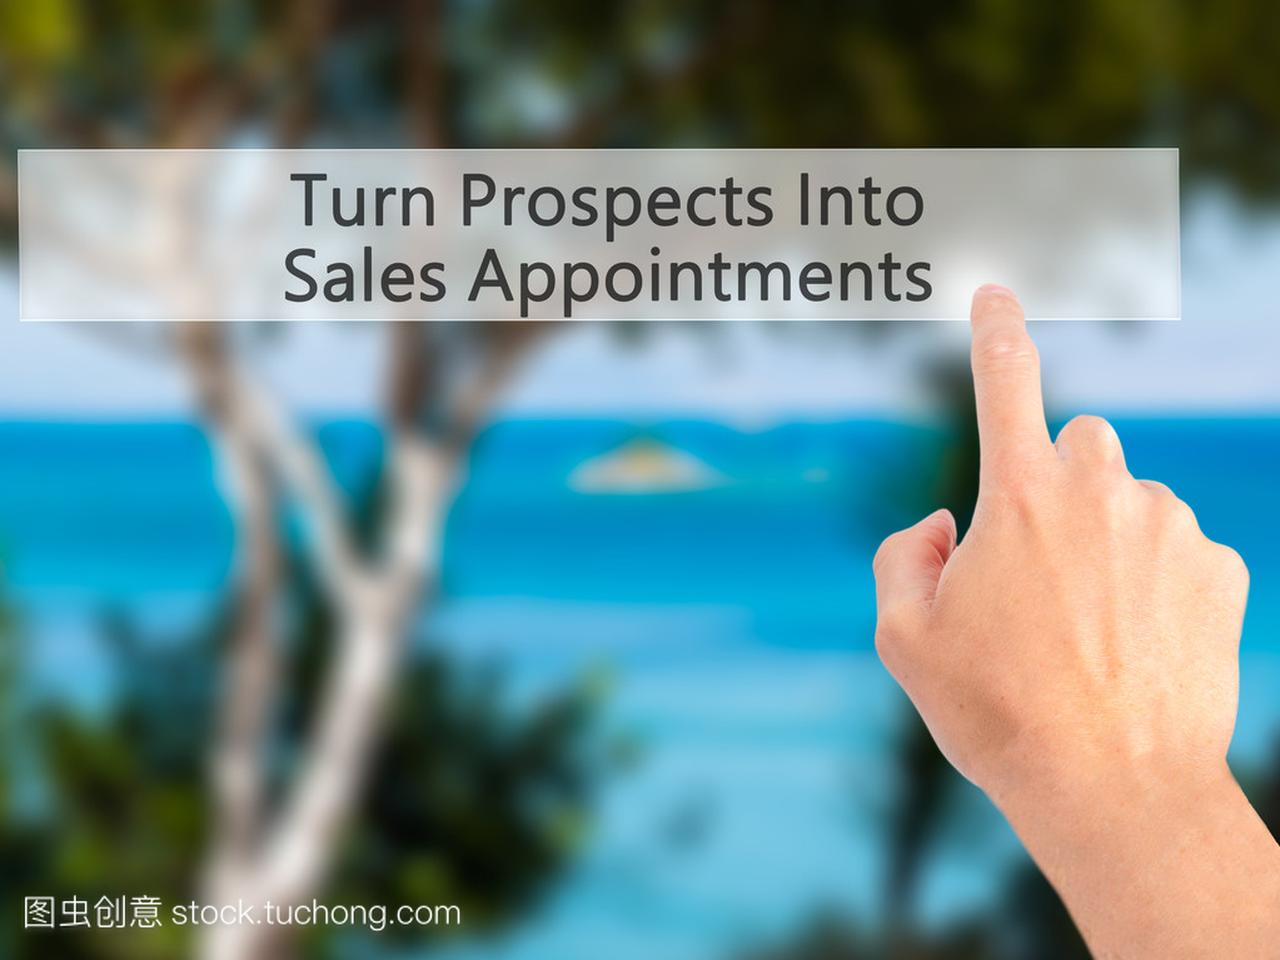 Turn Prospects Into Sales Appointments - Hand